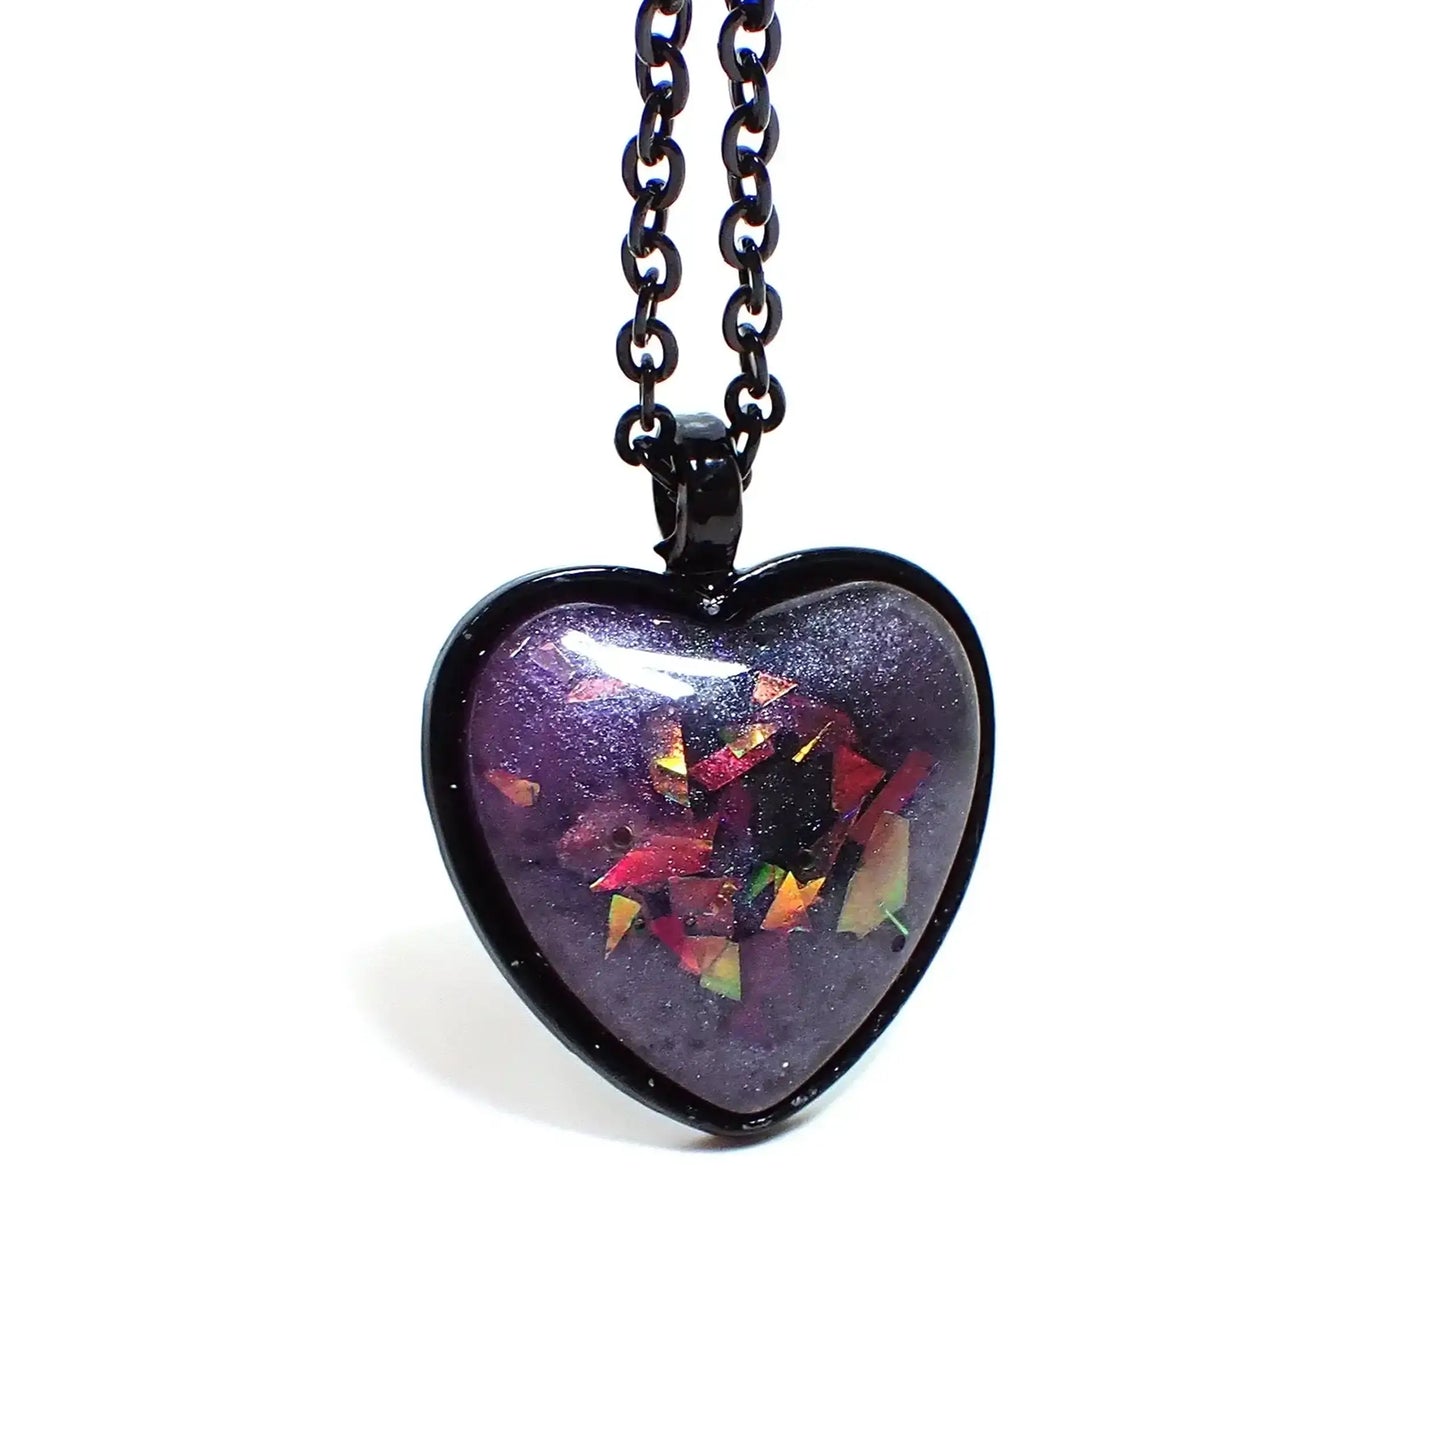 Enlarged front view of the Goth black heart pendant necklace. The chain and setting are black coated. There is a domed heart pendant at the bottom with a handmade resin cab. The resin has pearly shades of purple resin. There are pieces of chunky iridescent glitter embedded in it that show different colors depending on how the light hits it.